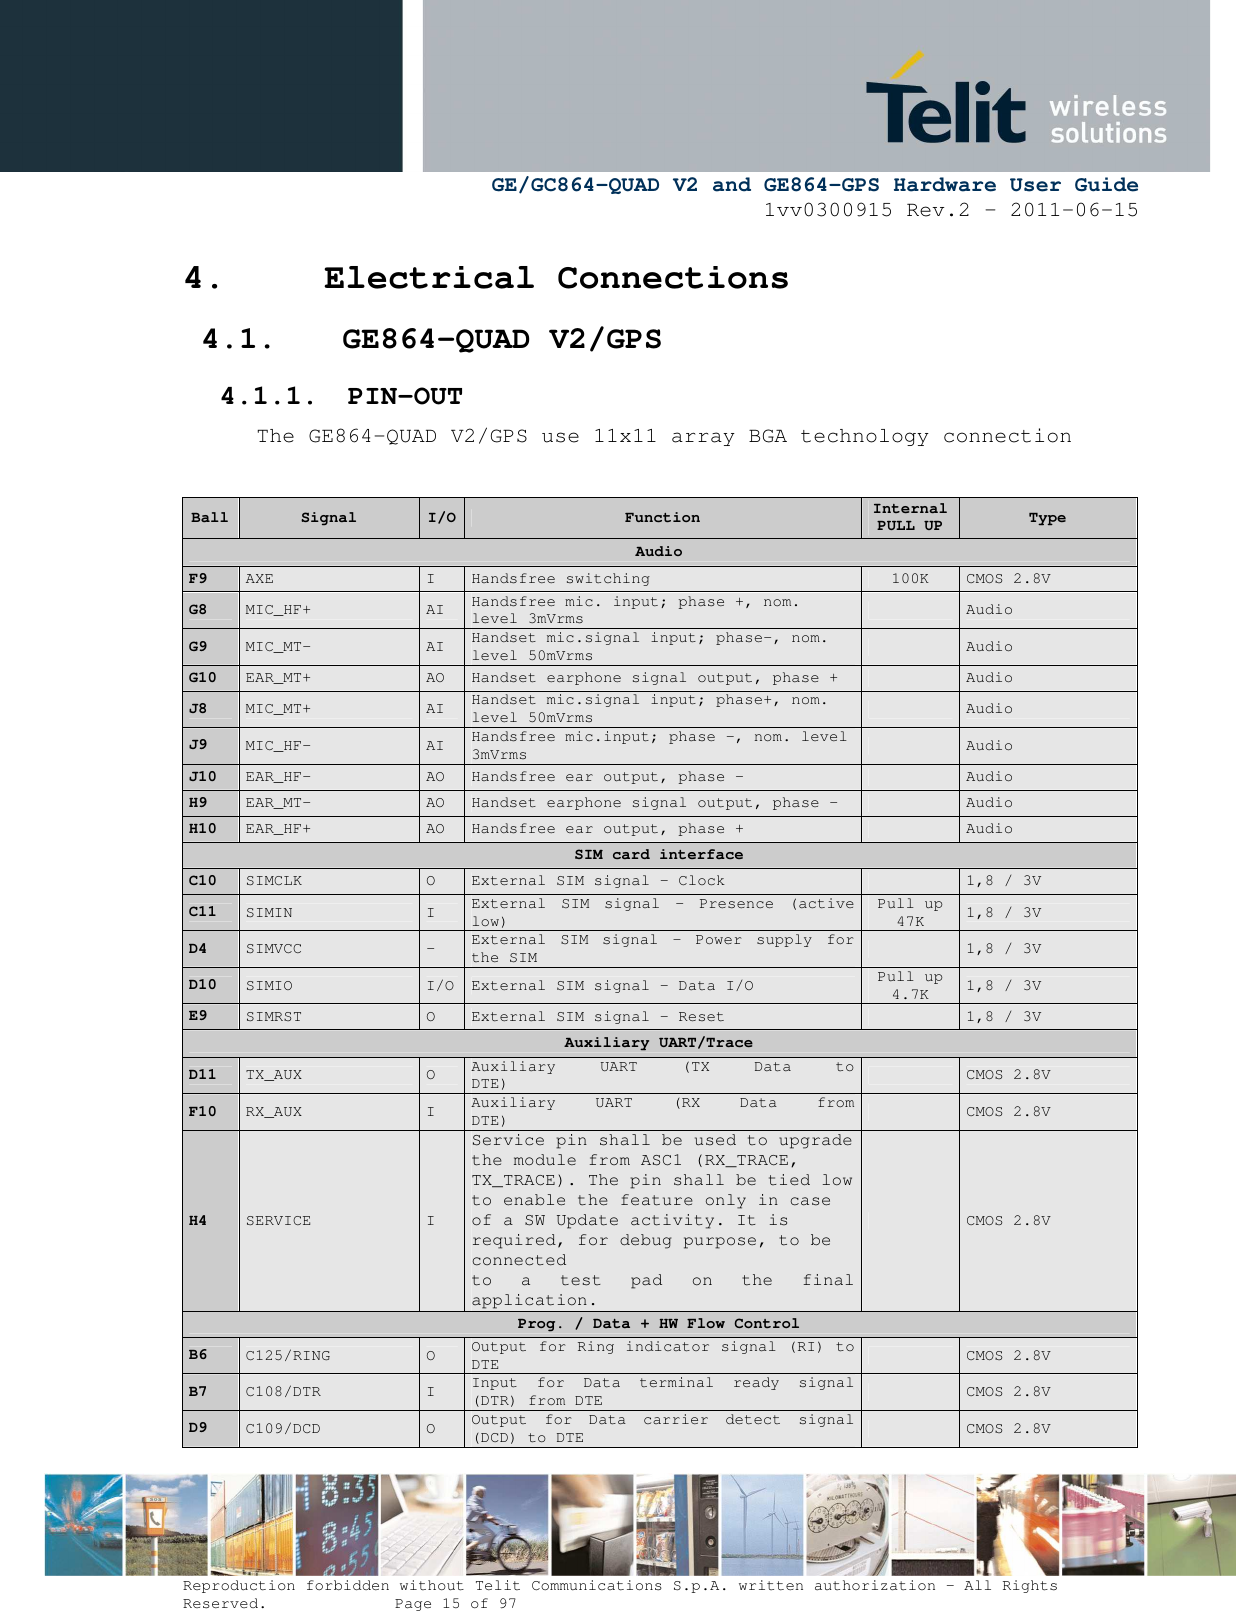      GE/GC864-QUAD V2 and GE864-GPS Hardware User Guide 1vv0300915 Rev.2 – 2011-06-15  Reproduction forbidden without Telit Communications S.p.A. written authorization - All Rights Reserved.    Page 15 of 97  4. Electrical Connections 4.1. GE864-QUAD V2/GPS  4.1.1. PIN-OUT The GE864-QUAD V2/GPS use 11x11 array BGA technology connection  Ball Signal  I/O Function  Internal PULL UP  Type Audio F9  AXE  I  Handsfree switching   100K  CMOS 2.8V G8  MIC_HF+  AI  Handsfree mic. input; phase +, nom. level 3mVrms     Audio G9  MIC_MT-  AI  Handset mic.signal input; phase-, nom. level 50mVrms     Audio G10  EAR_MT+  AO  Handset earphone signal output, phase +     Audio J8  MIC_MT+  AI  Handset mic.signal input; phase+, nom. level 50mVrms     Audio J9  MIC_HF-  AI  Handsfree mic.input; phase -, nom. level 3mVrms     Audio J10  EAR_HF-  AO  Handsfree ear output, phase -     Audio H9  EAR_MT-  AO  Handset earphone signal output, phase -     Audio H10  EAR_HF+  AO  Handsfree ear output, phase +     Audio SIM card interface C10  SIMCLK  O  External SIM signal – Clock     1,8 / 3V C11  SIMIN  I  External  SIM  signal  - Presence  (active low) Pull up 47K          1,8 / 3V D4  SIMVCC  -  External  SIM  signal  – Power  supply  for the SIM    1,8 / 3V D10  SIMIO  I/O  External SIM signal - Data I/O  Pull up 4.7K  1,8 / 3V E9  SIMRST  O  External SIM signal – Reset     1,8 / 3V Auxiliary UART/Trace D11  TX_AUX  O Auxiliary  UART  (TX  Data  to DTE)                 CMOS 2.8V F10  RX_AUX  I Auxiliary  UART  (RX  Data  from DTE)                 CMOS 2.8V H4  SERVICE  I Service pin shall be used to upgrade the module from ASC1 (RX_TRACE, TX_TRACE). The pin shall be tied low to enable the feature only in case of a SW Update activity. It is required, for debug purpose, to be connected to  a  test  pad  on  the  final application.   CMOS 2.8V Prog. / Data + HW Flow Control B6  C125/RING  O Output for Ring indicator signal (RI) to DTE      CMOS 2.8V B7  C108/DTR  I Input  for  Data  terminal  ready  signal (DTR) from DTE       CMOS 2.8V D9  C109/DCD  O  Output  for  Data  carrier  detect  signal (DCD) to DTE      CMOS 2.8V 